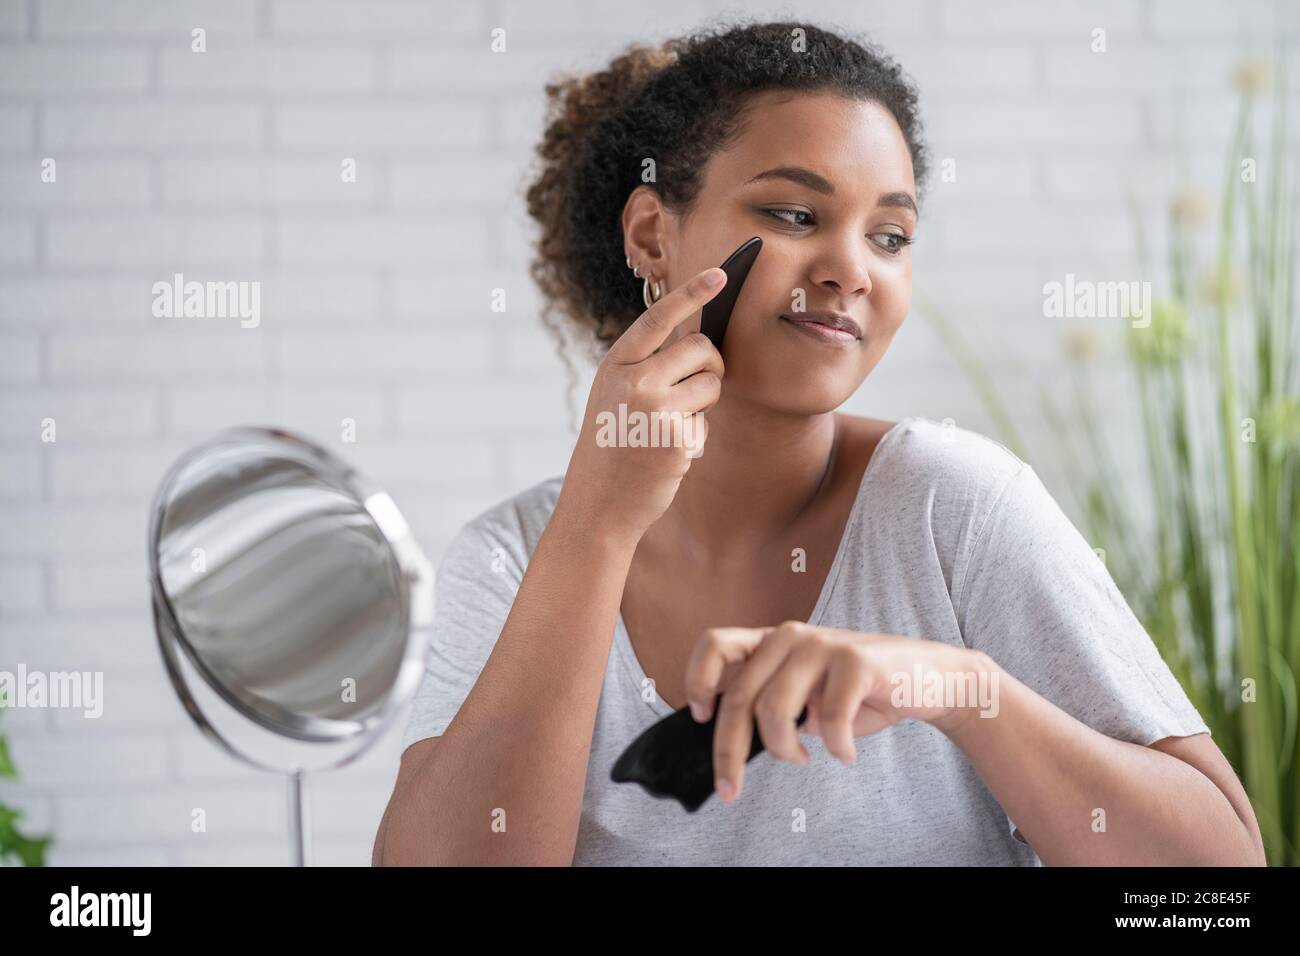 Close-up of young woman massaging face with gua sha stone at home Stock Photo